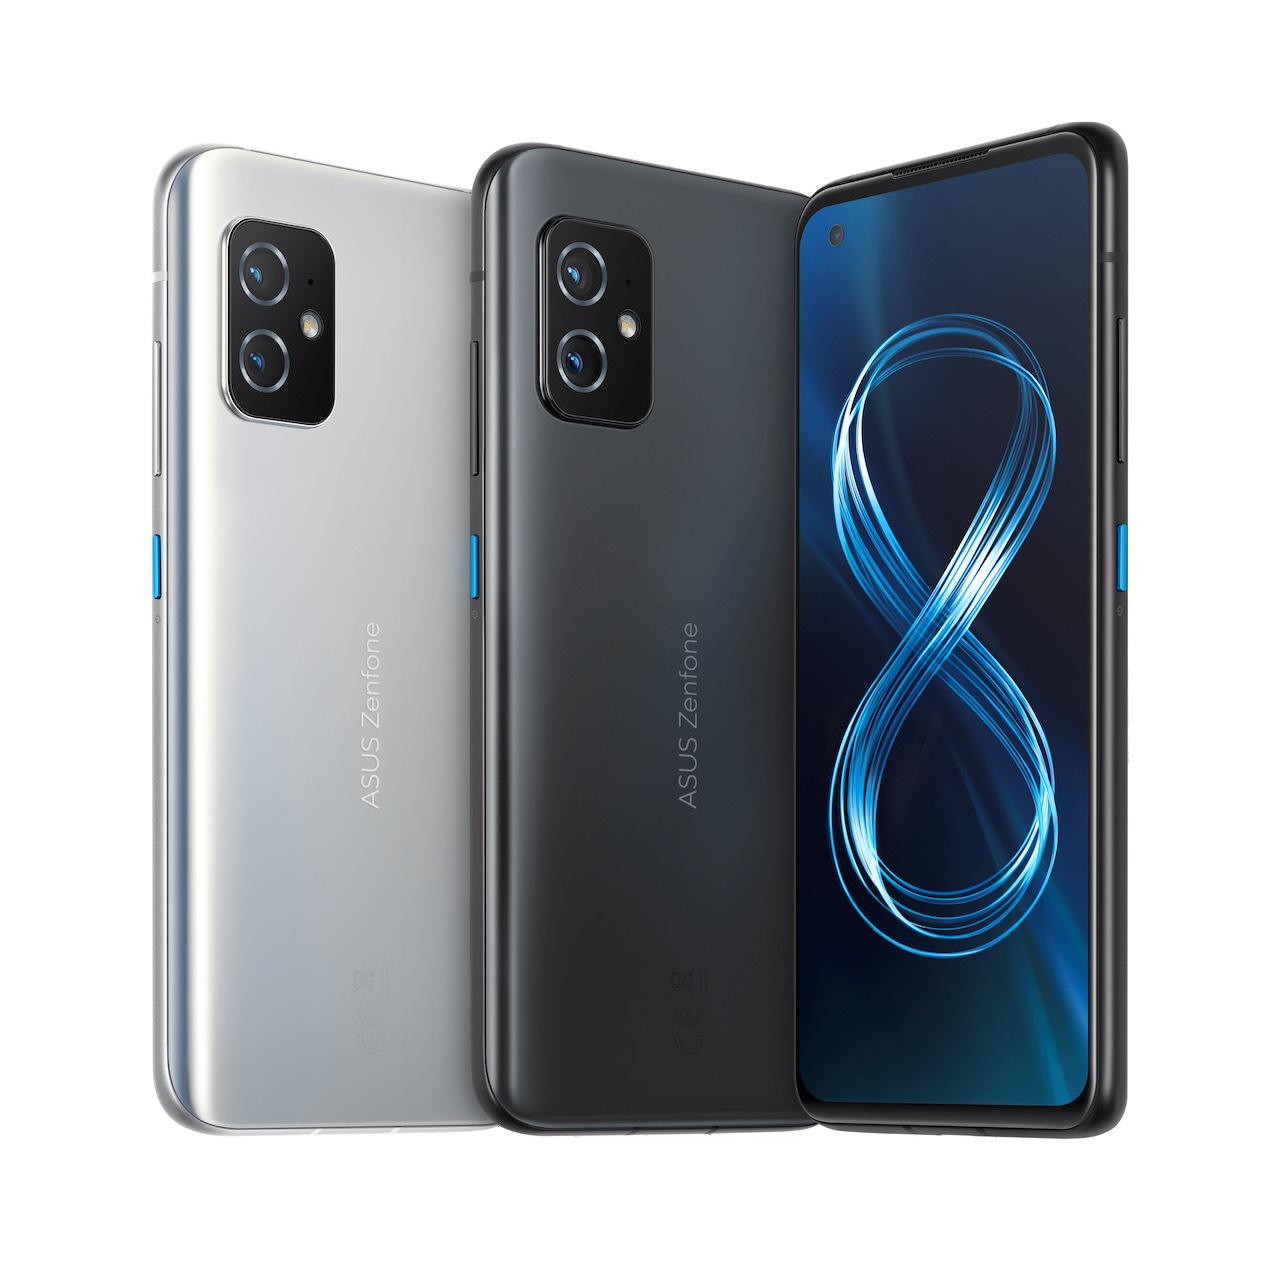 ASUS announced All-New Zenfone 8 in Singapore